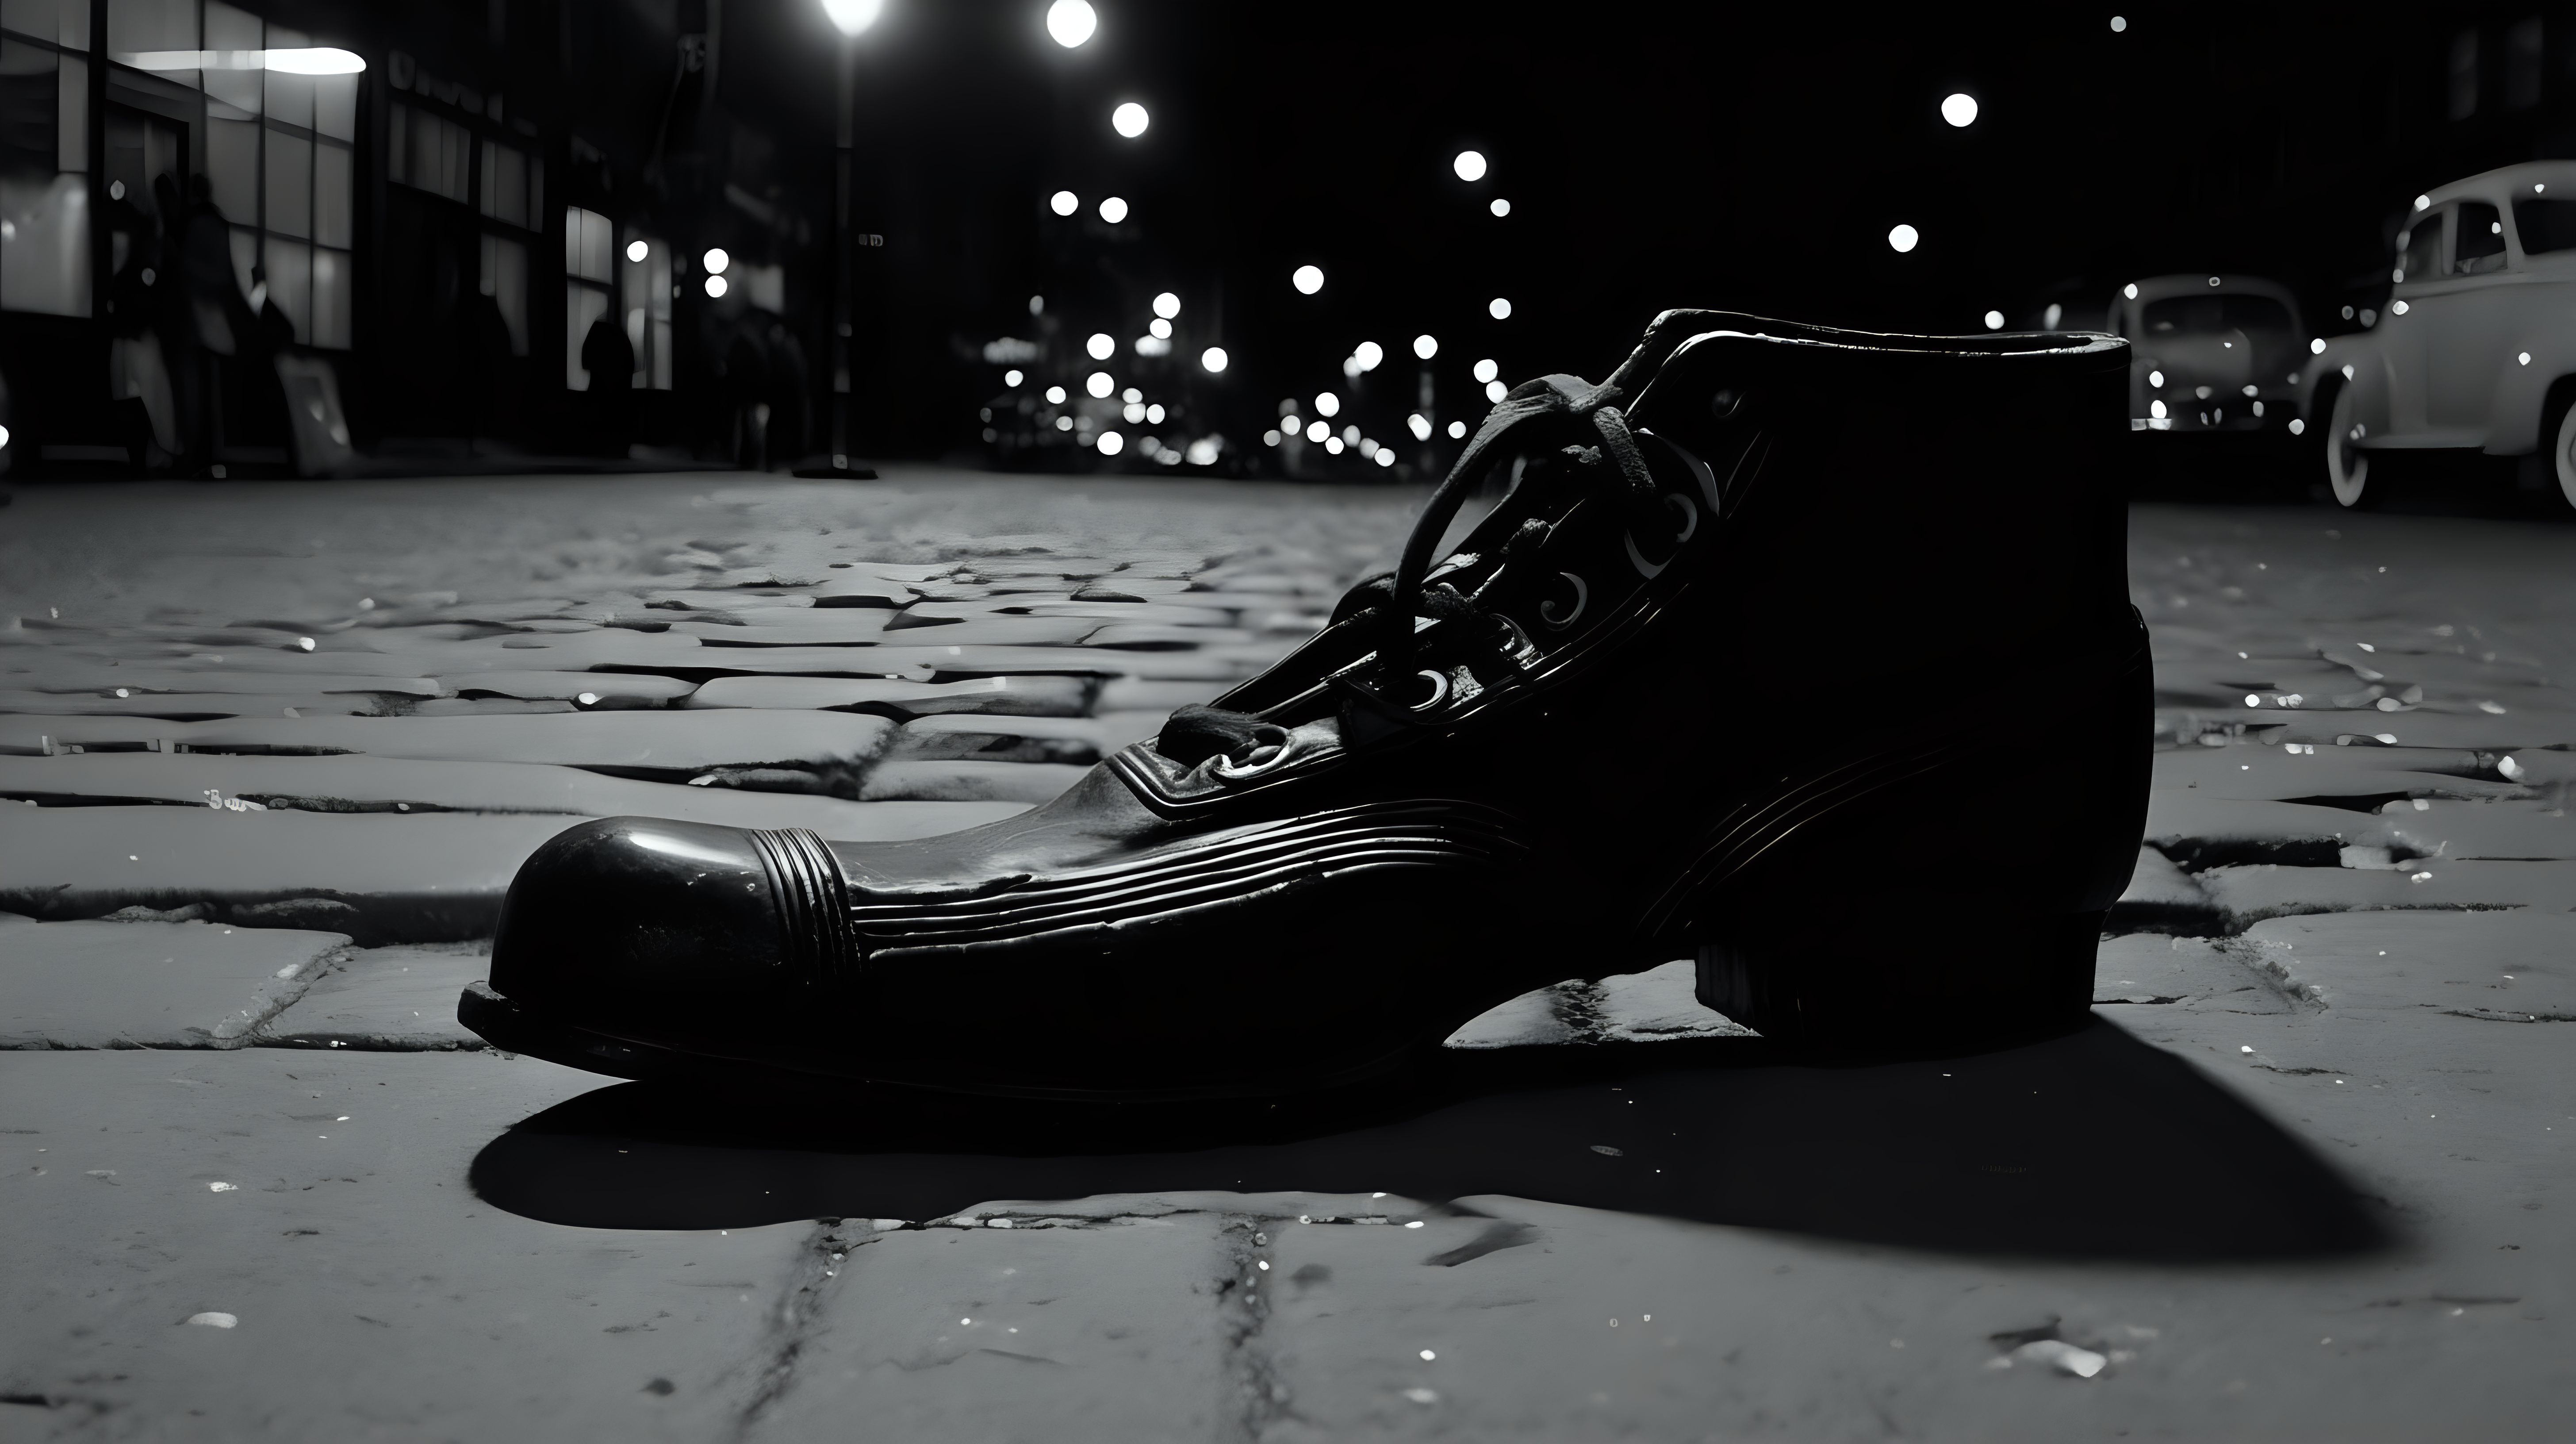 Big old black shoe, placed on the pavement in a dark 1950 New York like city. Nighttime.
Tiny people live in the shoe and it's filled with tiny little windows with light and people and curatins in them.